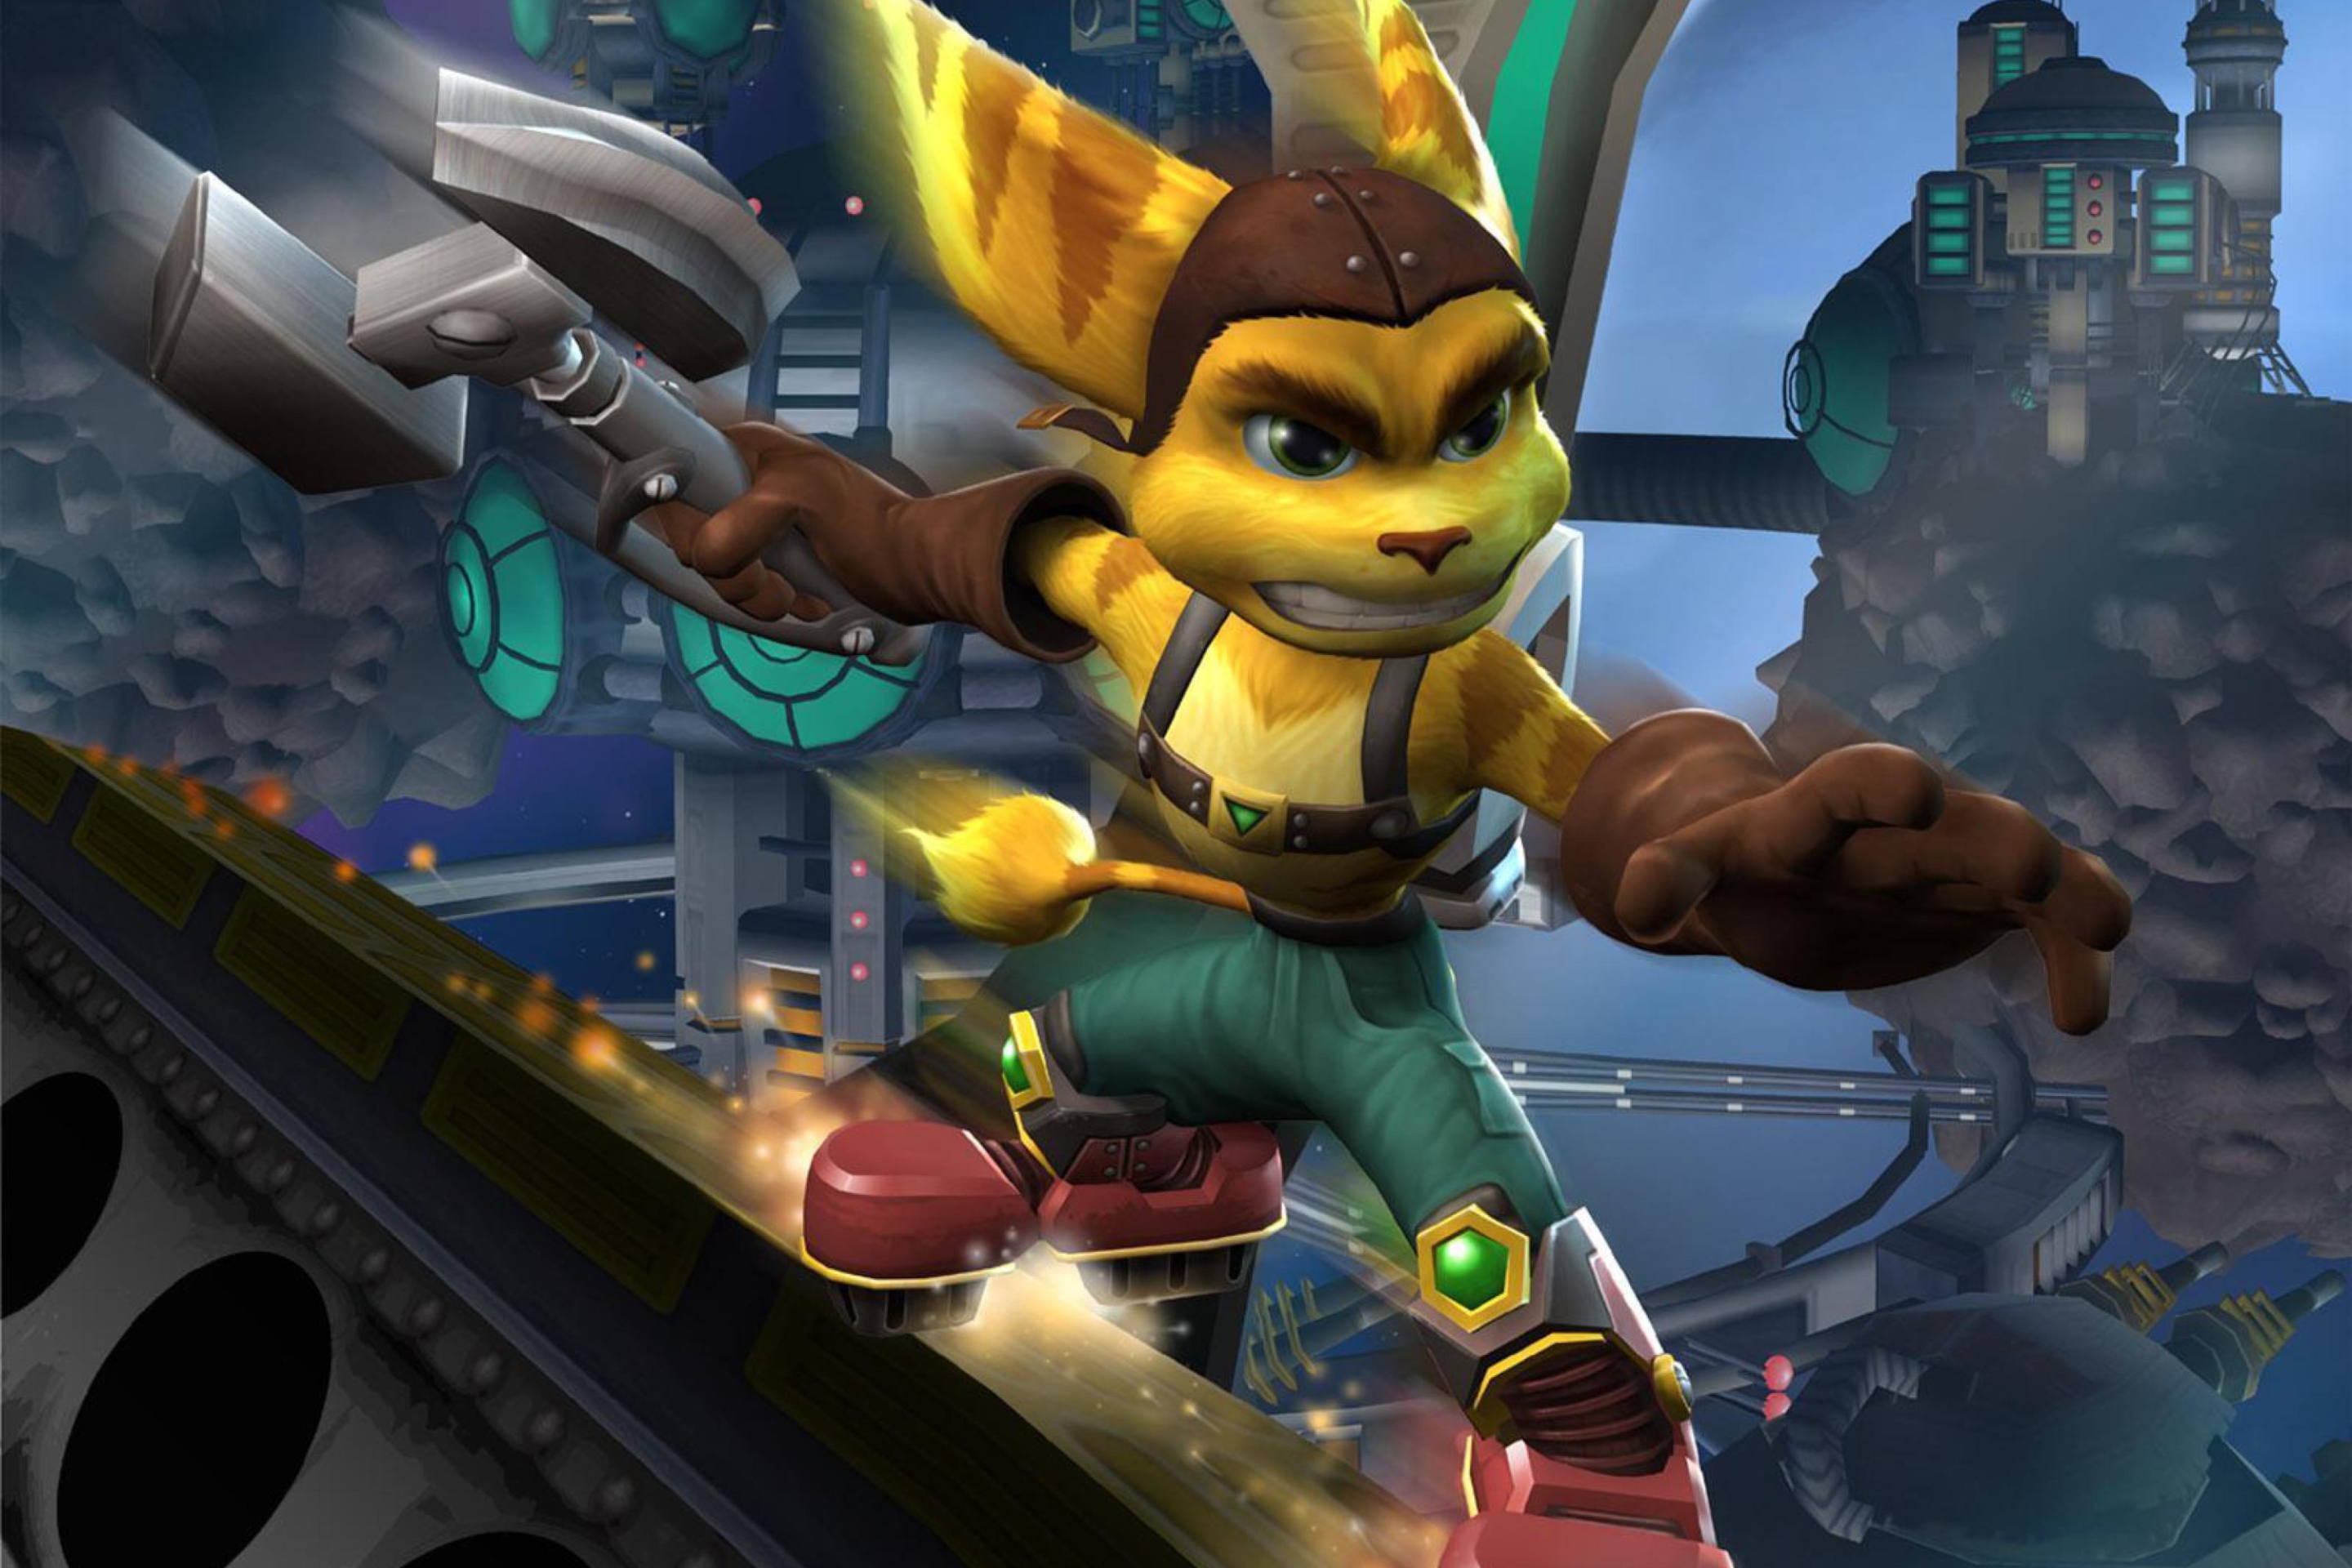 Das Ratchet and Clank Wallpaper 2880x1920